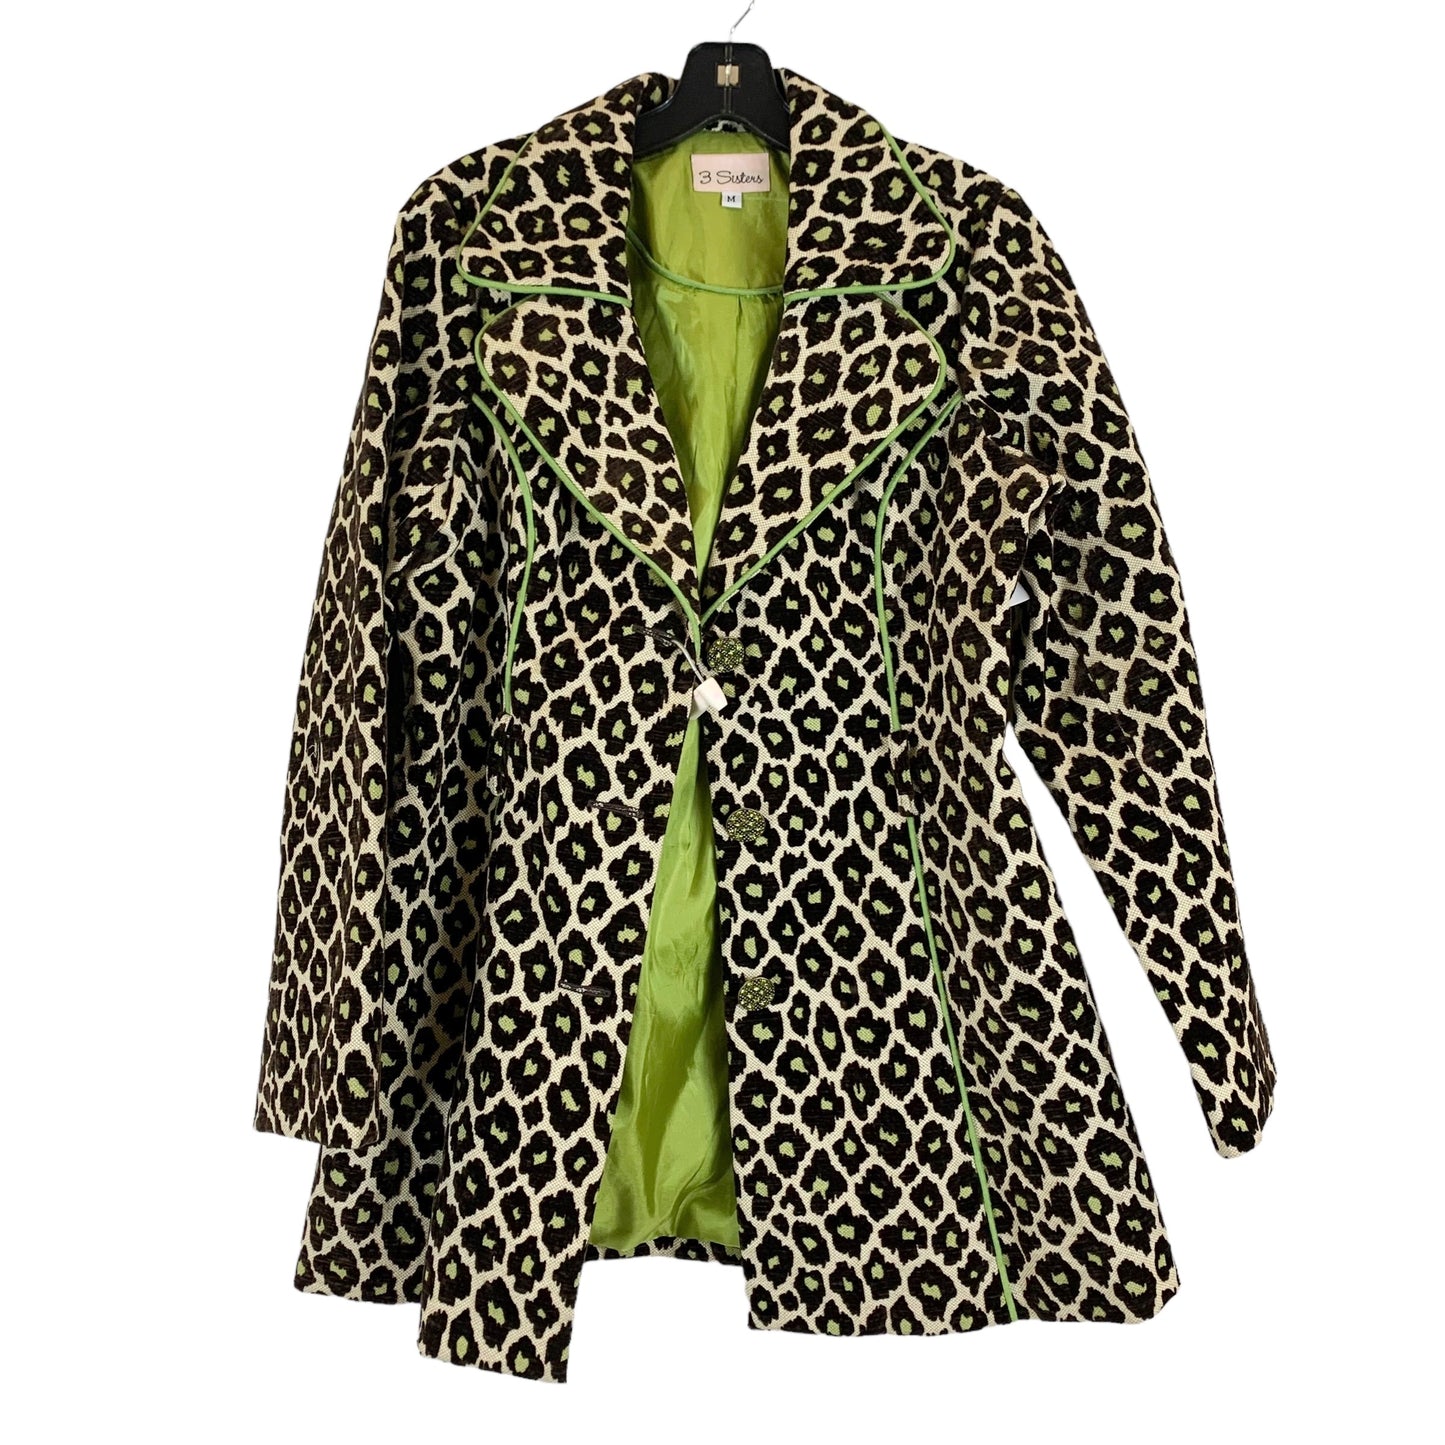 Brown & Green Coat Other 3 Sisters, Size M